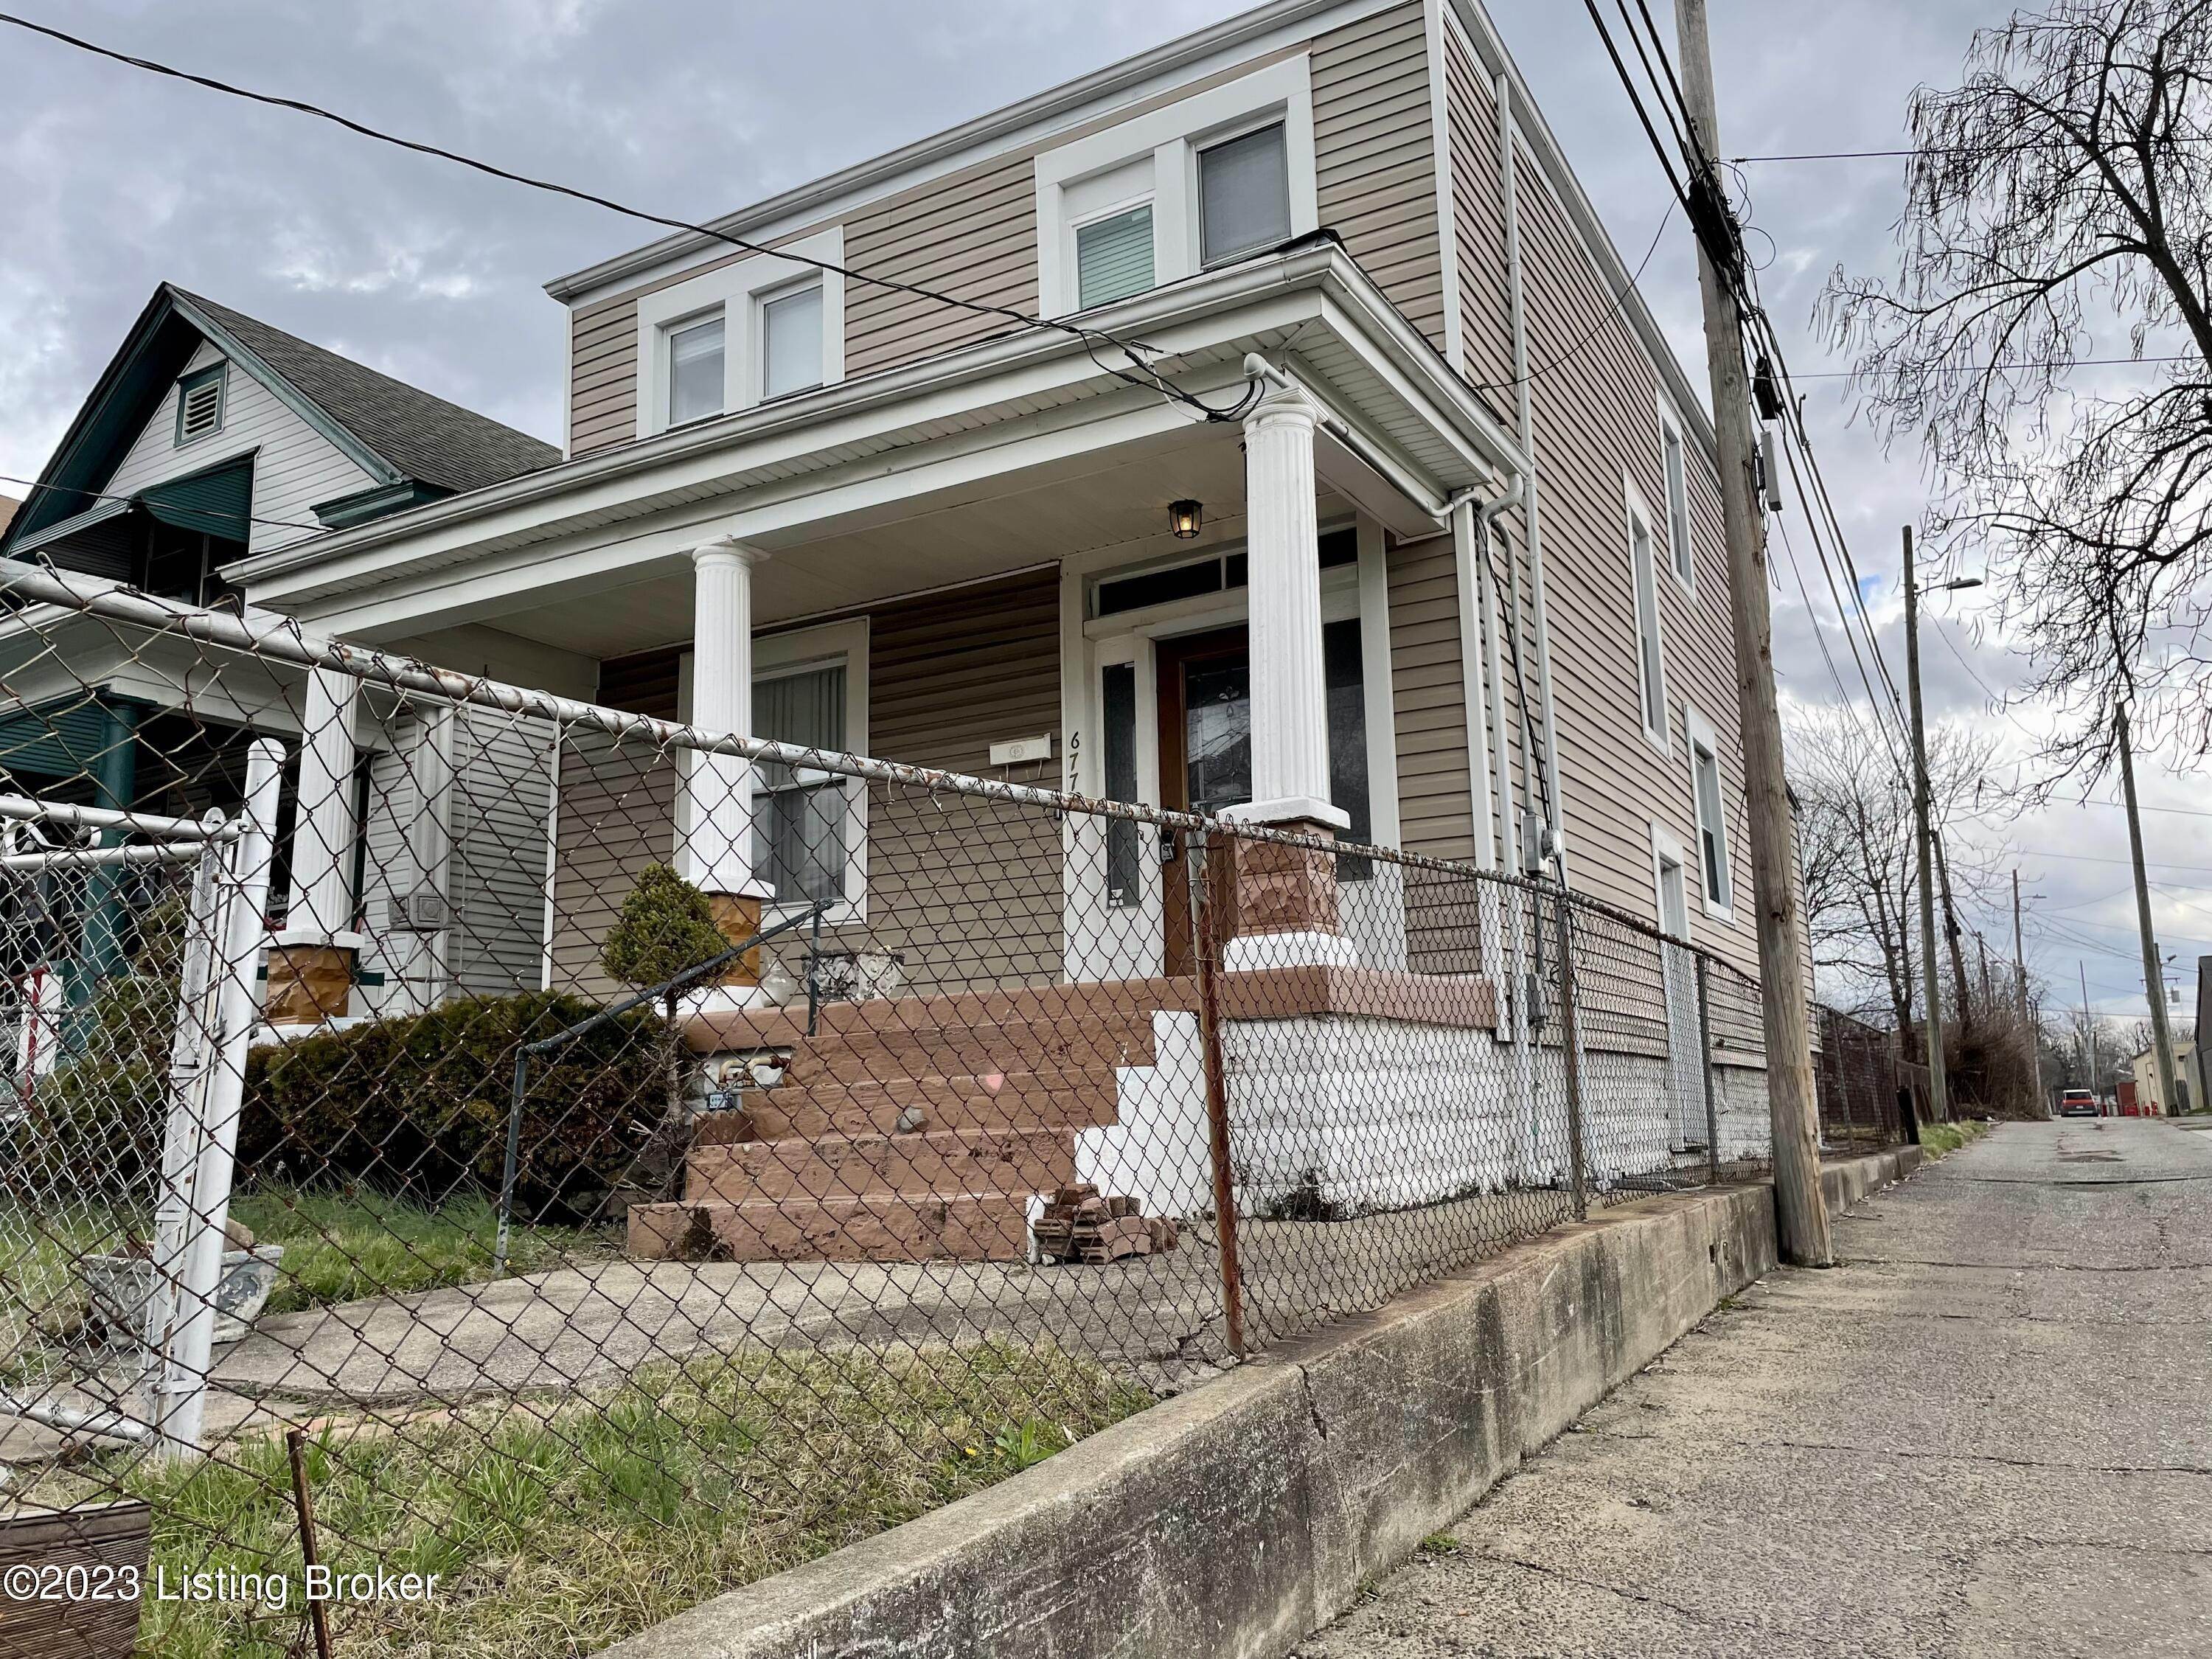 3. Single Family at Louisville, KY 40211